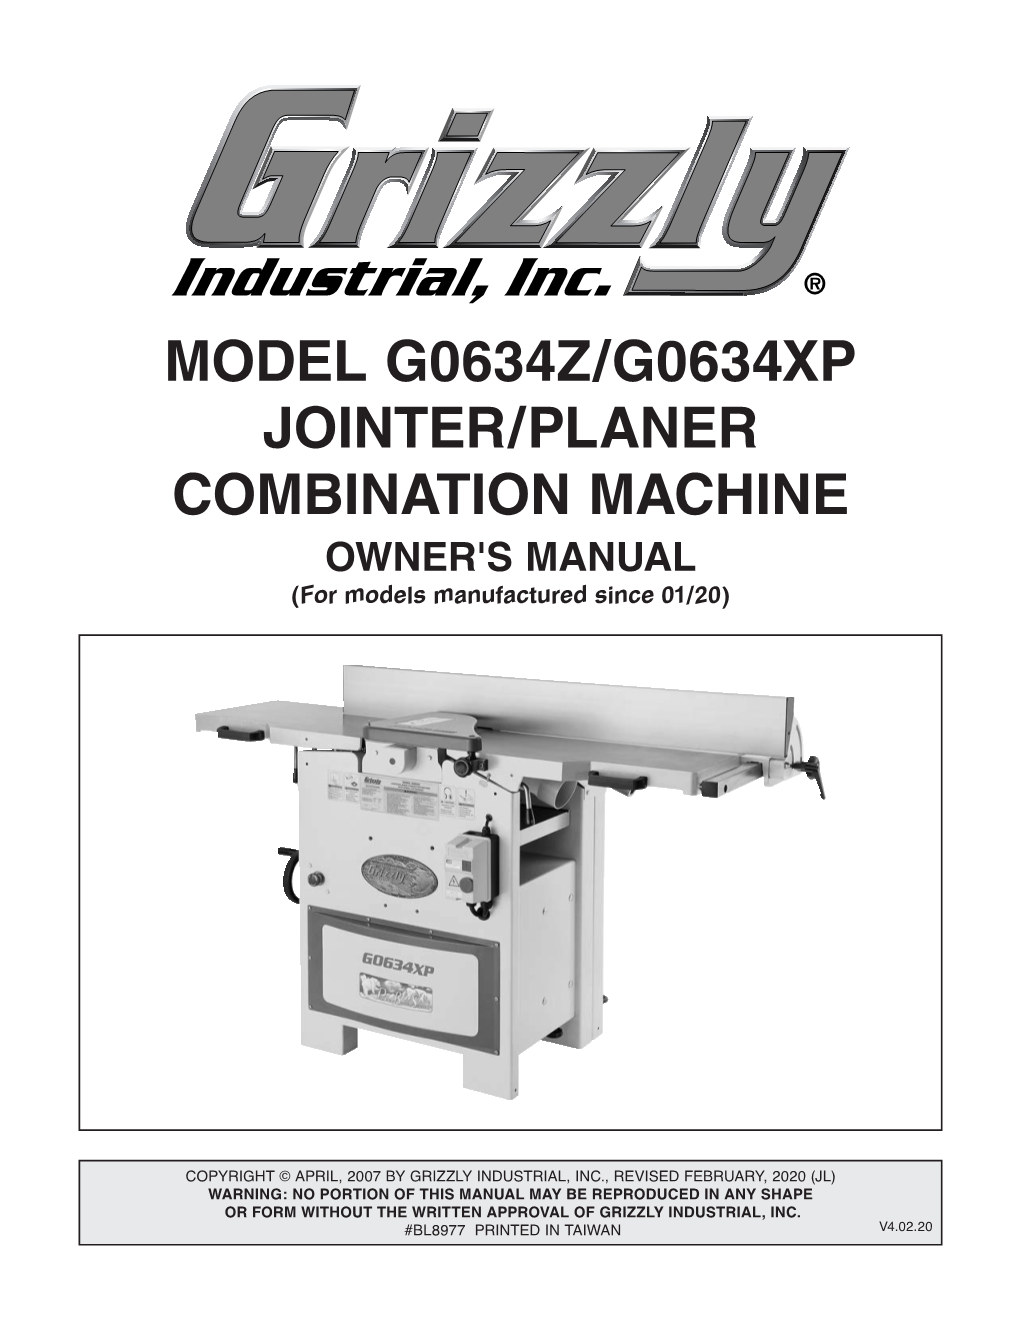 MODEL G0634Z/G0634XP JOINTER/PLANER COMBINATION MACHINE OWNER's MANUAL (For Models Manufactured Since 01/20)